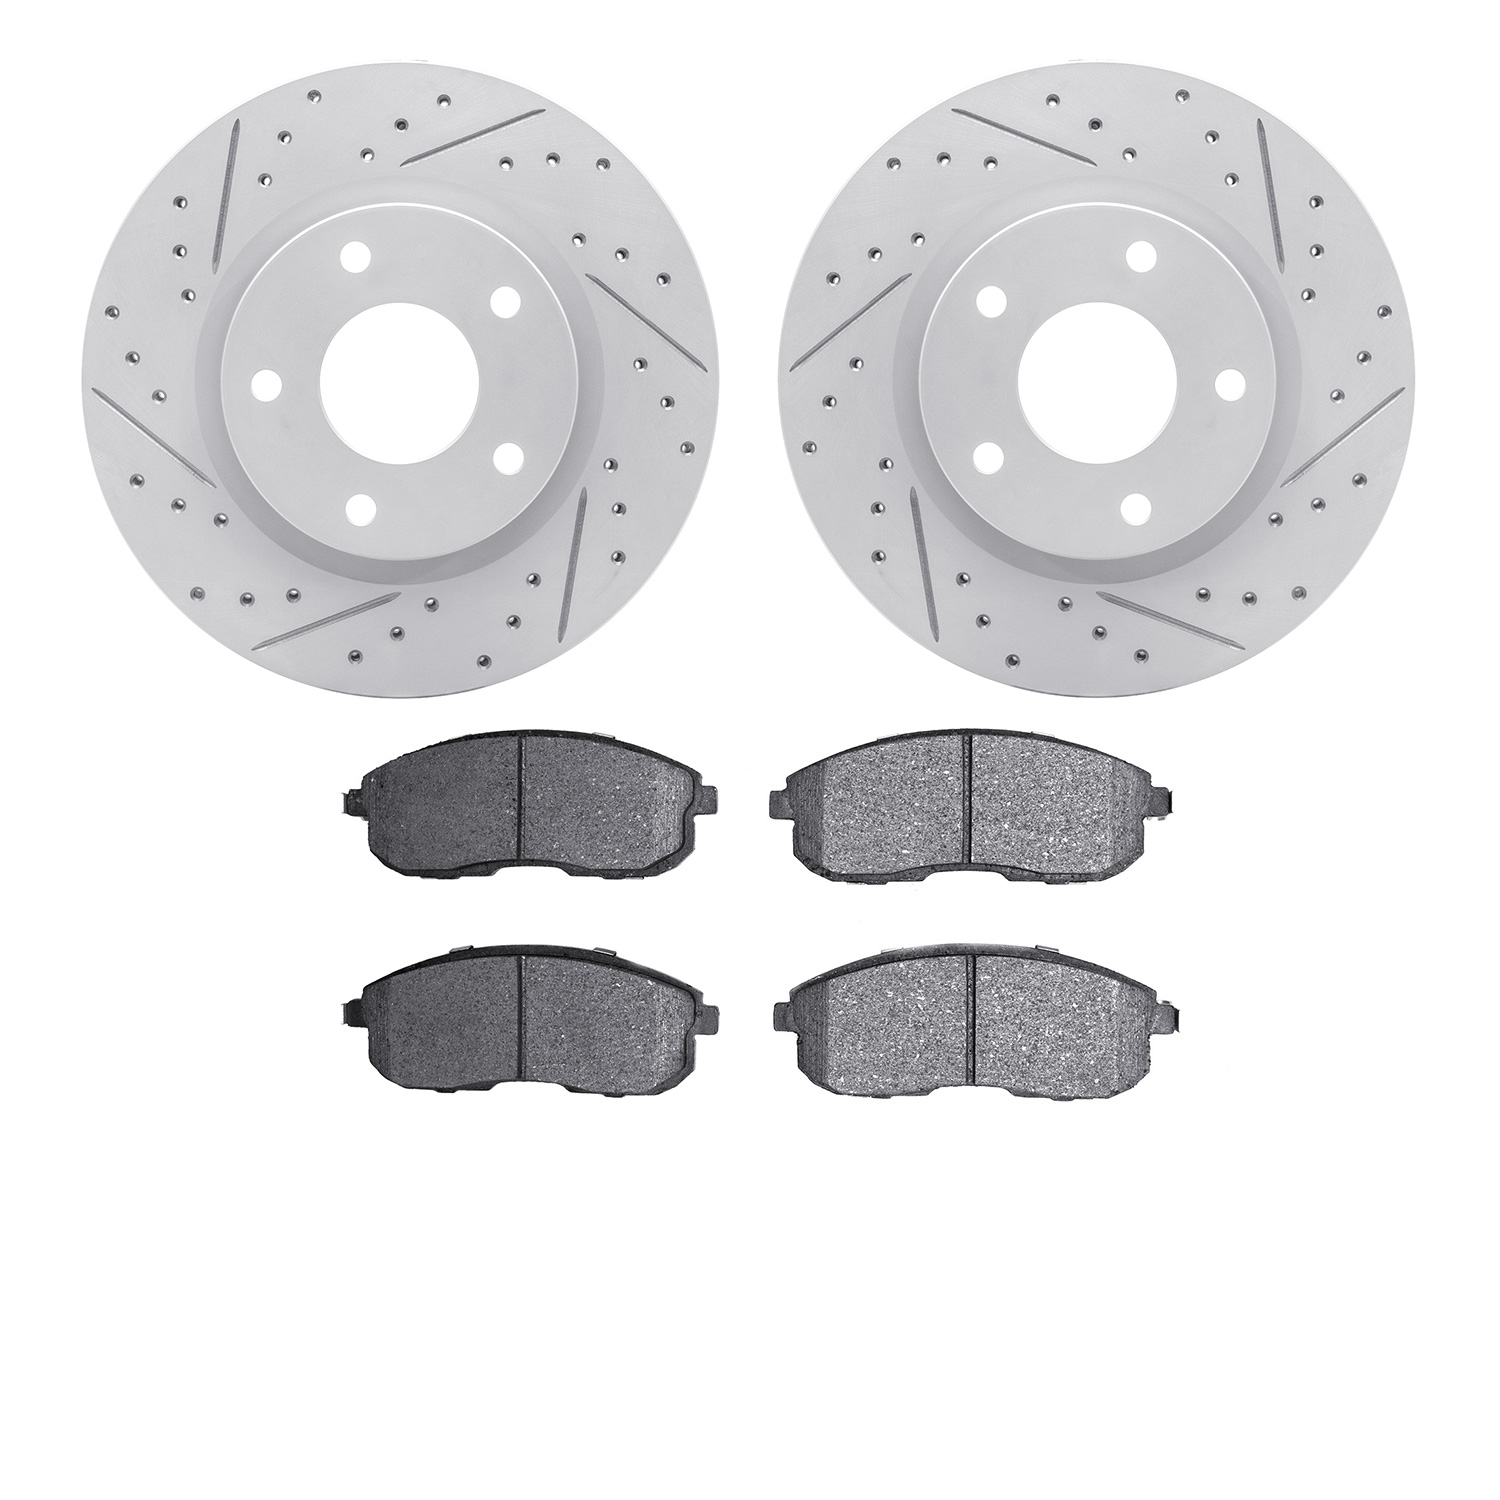 2502-67038 Geoperformance Drilled/Slotted Rotors w/5000 Advanced Brake Pads Kit, 2013-2019 Infiniti/Nissan, Position: Front